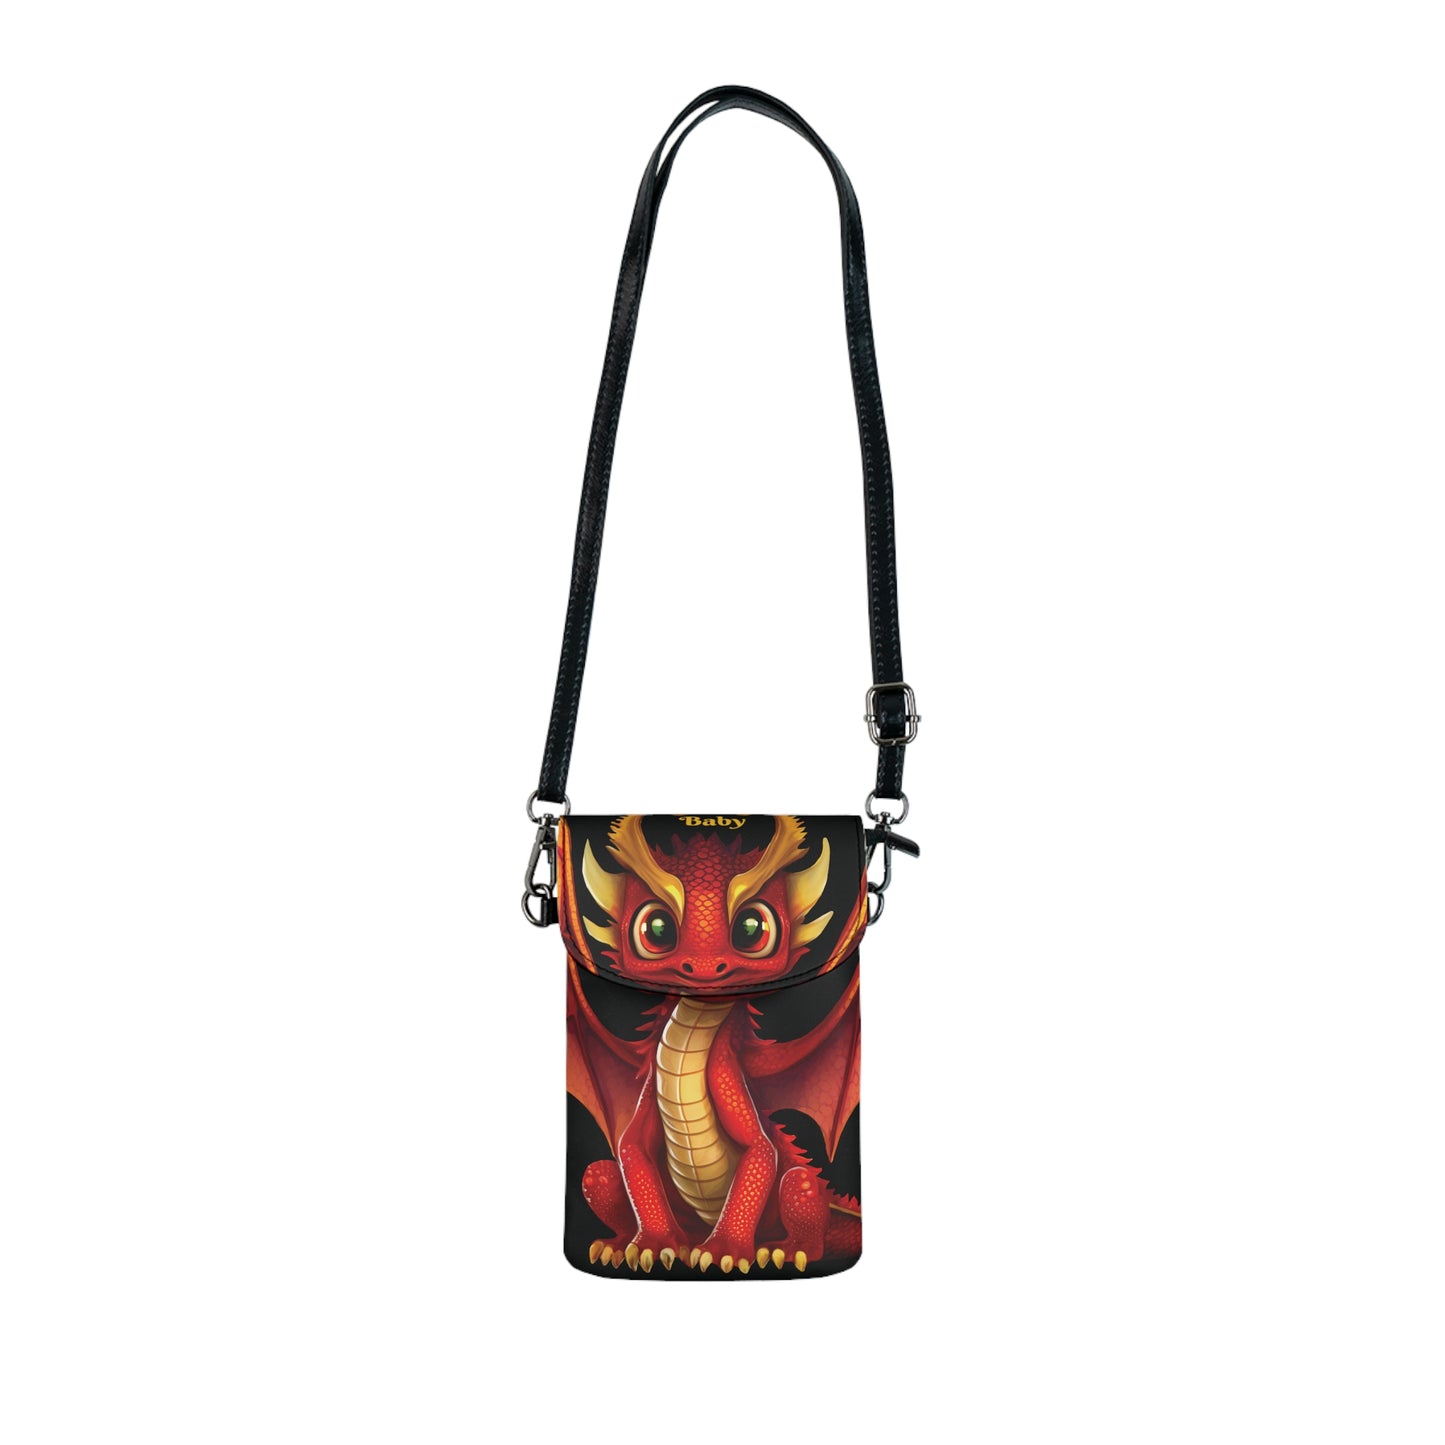 Naughty Fire Dragons Small Cell Phone Wallet - Perfect Gift For Teens & Spicy (fun) People